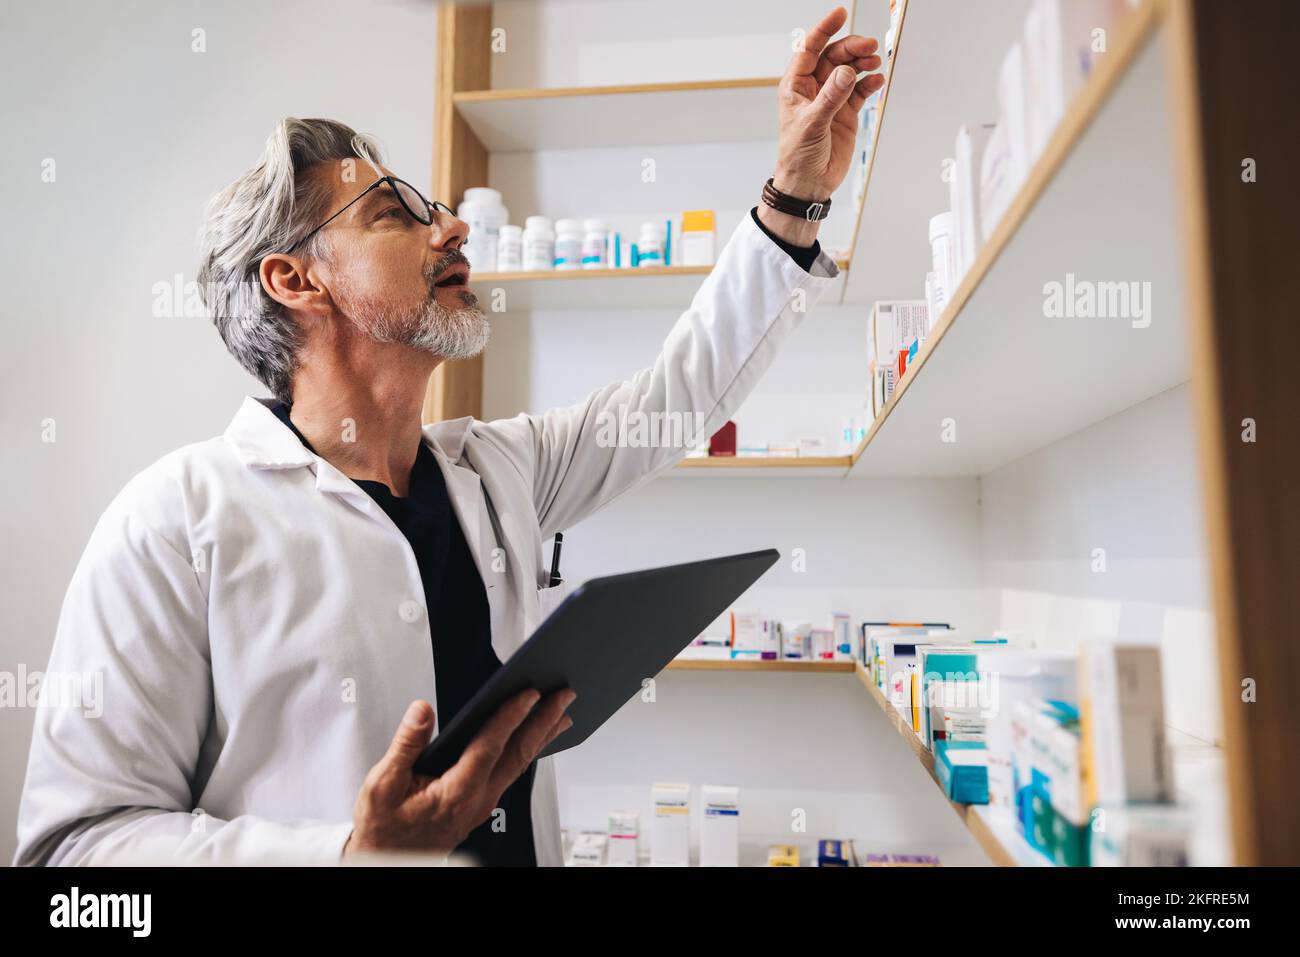 Senior pharmacist getting prescription medication from a shelf in a chemist. Male healthcare worker using a digital tablet to fill online prescription Stock Photo